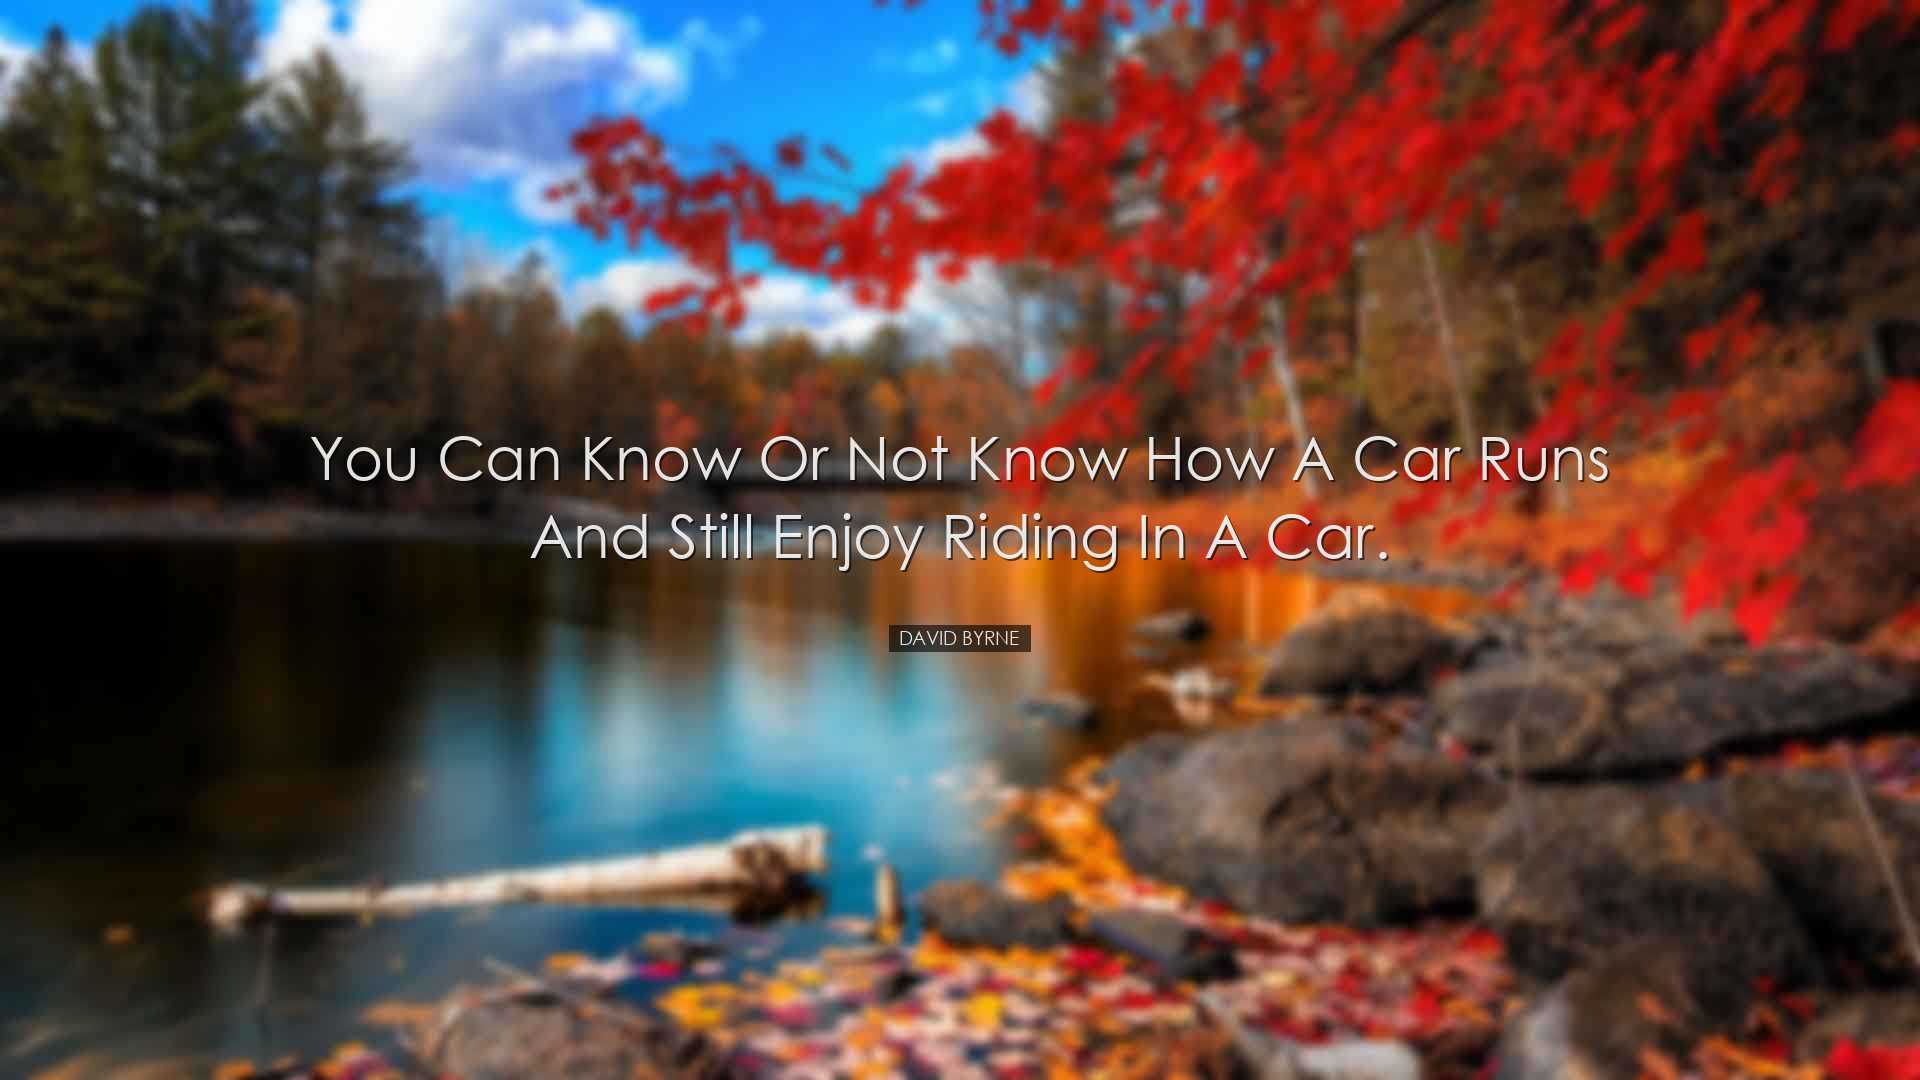 You can know or not know how a car runs and still enjoy riding in